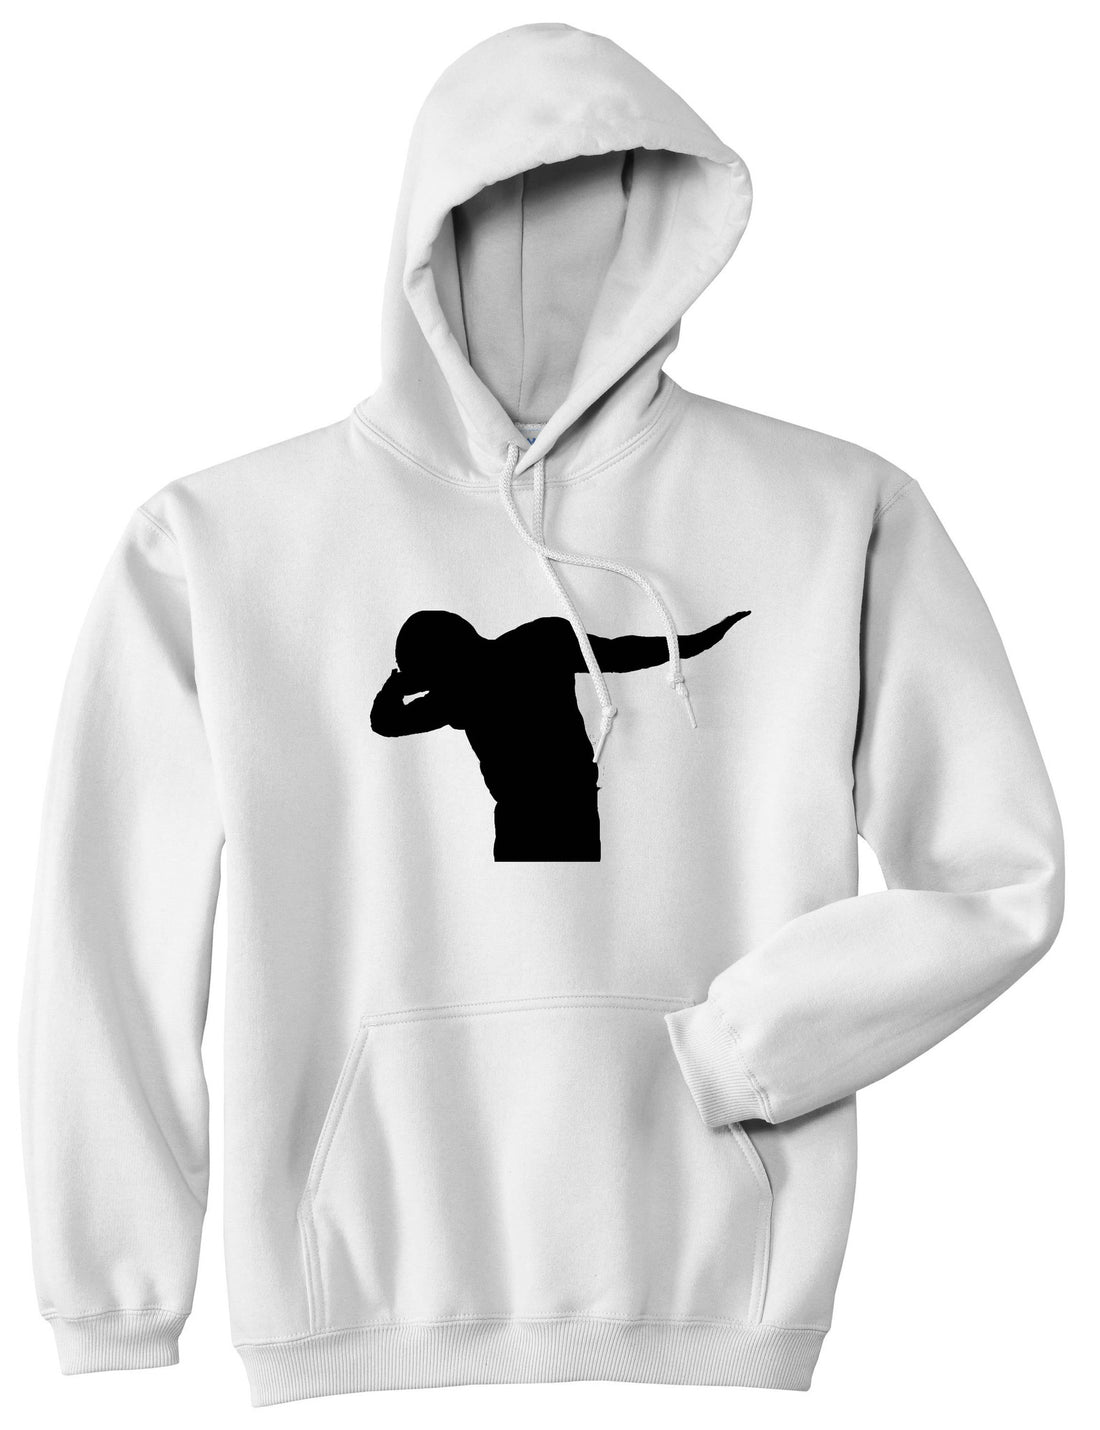 Dab On Em Football Pullover Hoodie Hoody by Kings Of NY